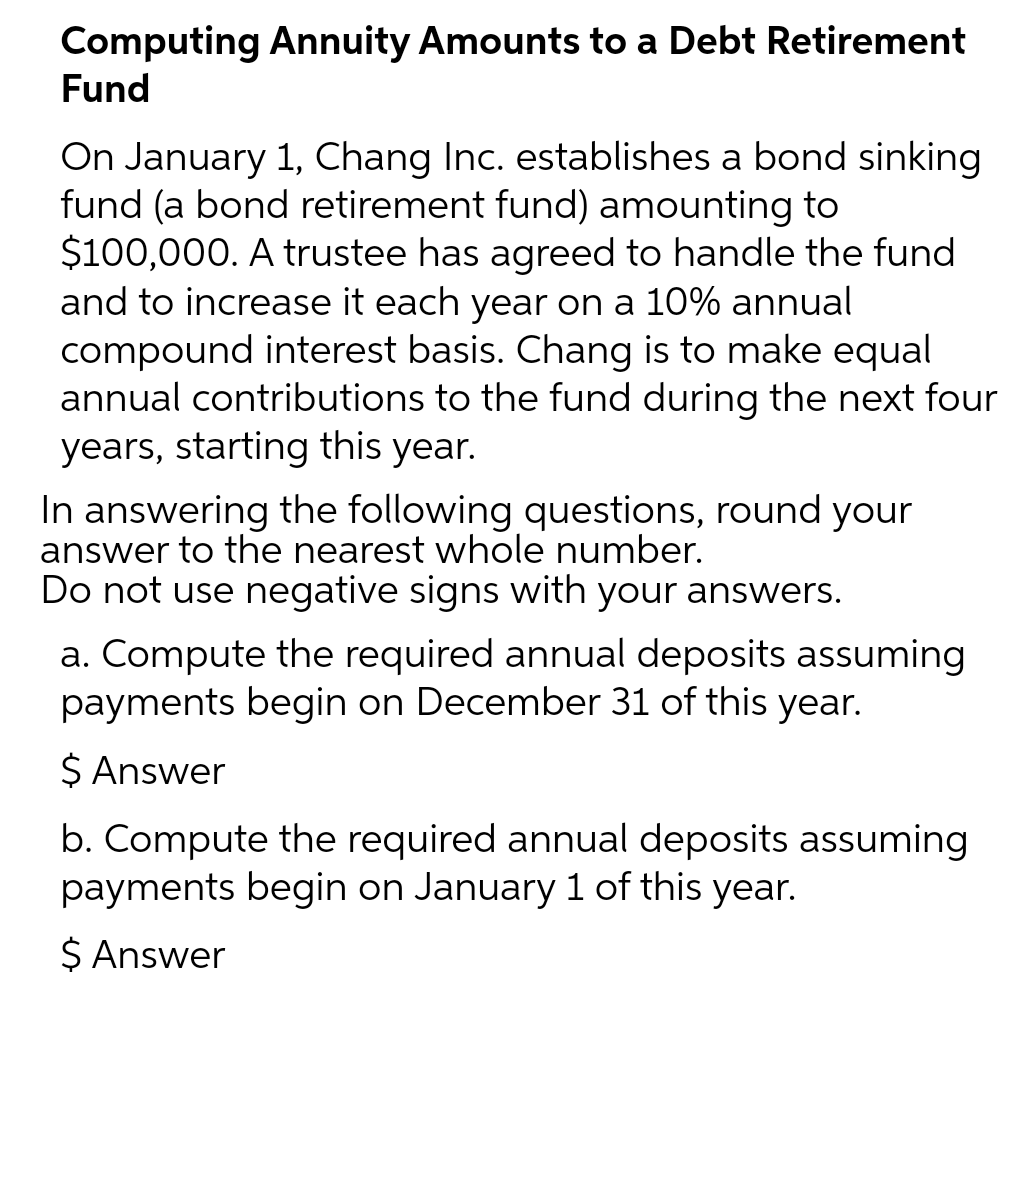 Computing Annuity Amounts to a Debt Retirement
Fund
On January 1, Chang Inc. establishes a bond sinking
fund (a bond retirement fund) amounting to
$100,000. A trustee has agreed to handle the fund
and to increase it each year on a 10% annual
compound interest basis. Chang is to make equal
annual contributions to the fund during the next four
years, starting this year.
In answering the following questions, round your
answer to the nearest whole number.
Do not use negative signs with your answers.
a. Compute the required annual deposits assuming
payments begin on December 31 of this year.
$ Answer
b. Compute the required annual deposits assuming
payments begin on January 1 of this year.
$ Answer